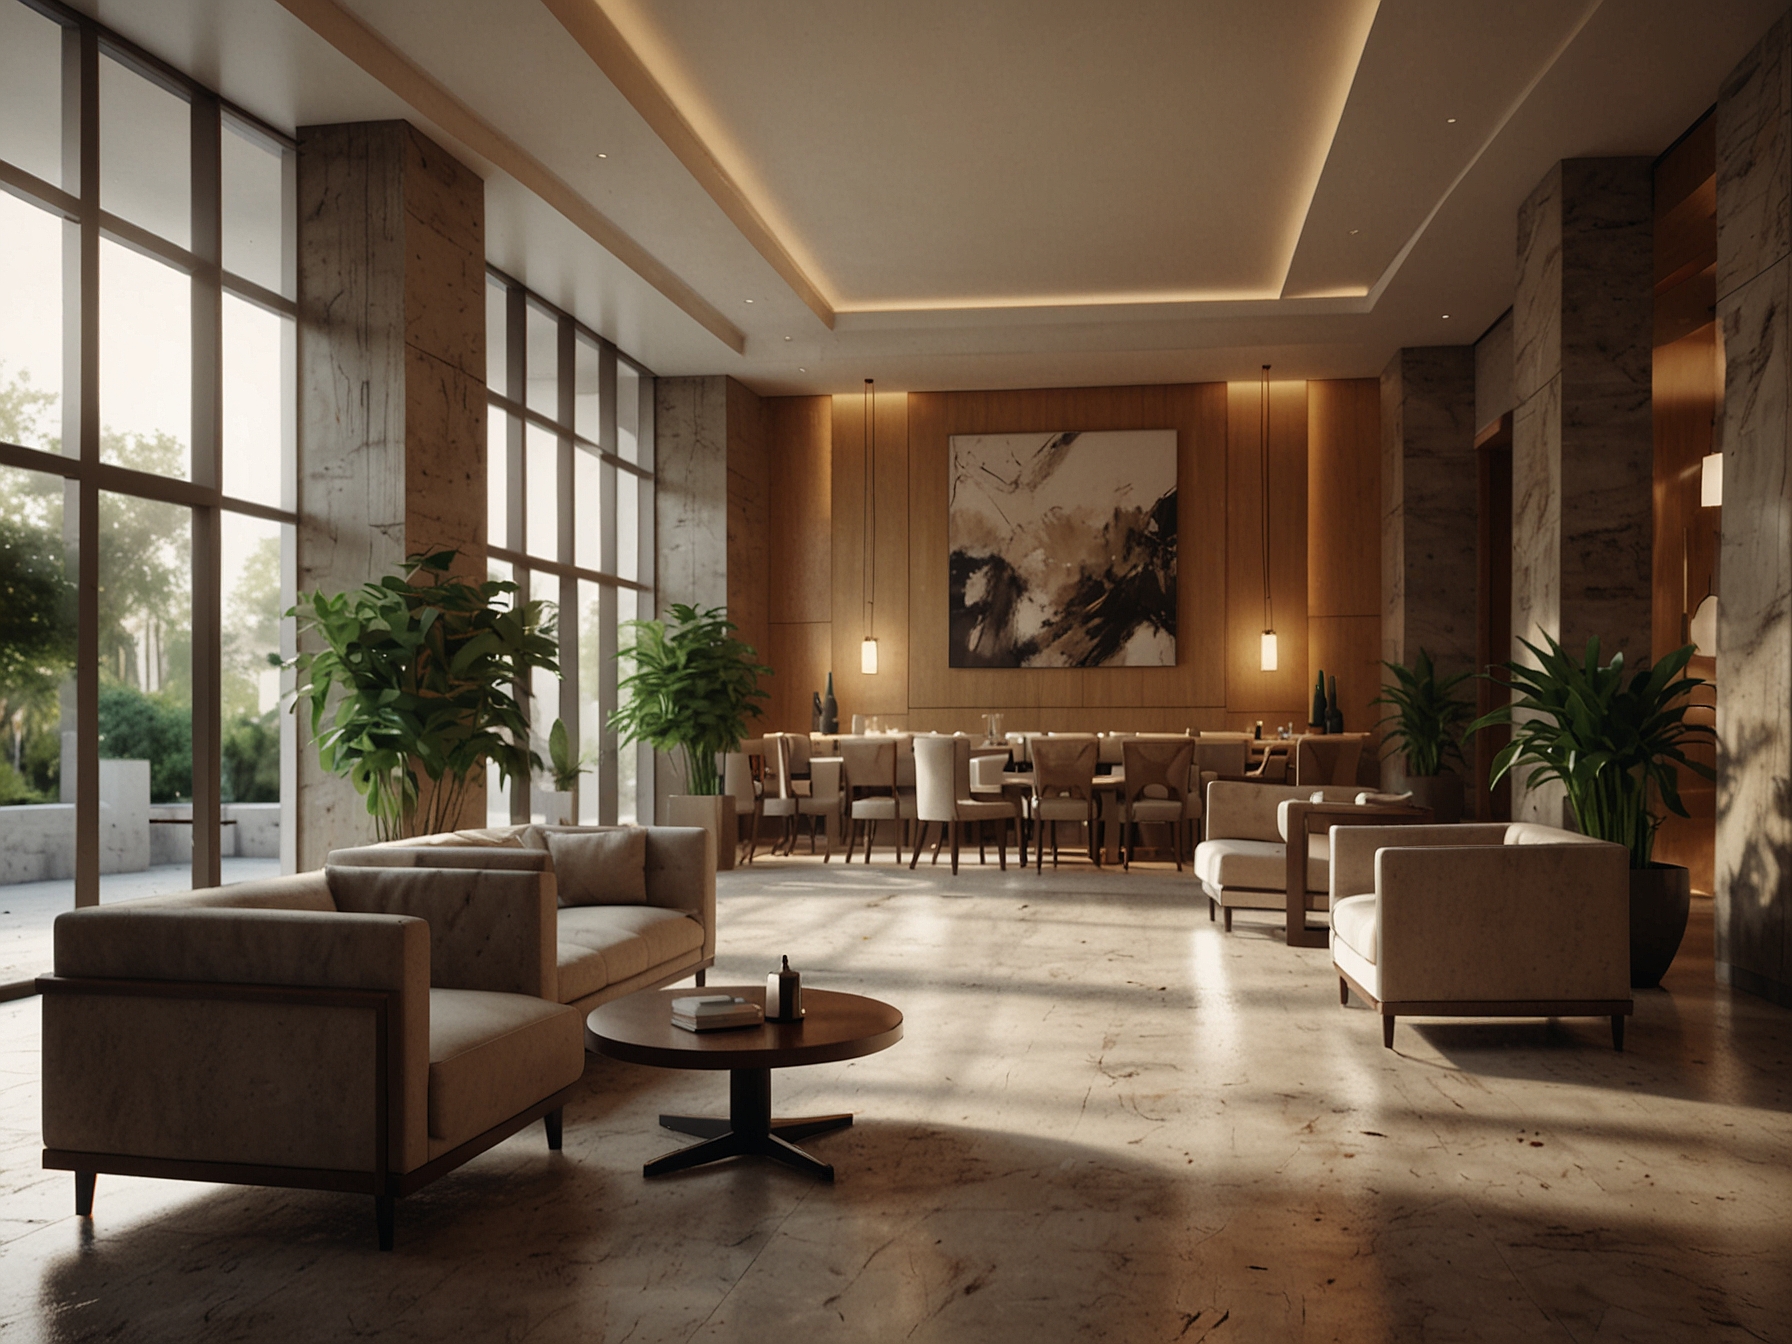 A serene image of a tranquil hotel lobby with minimalist decor and cozy seating areas.